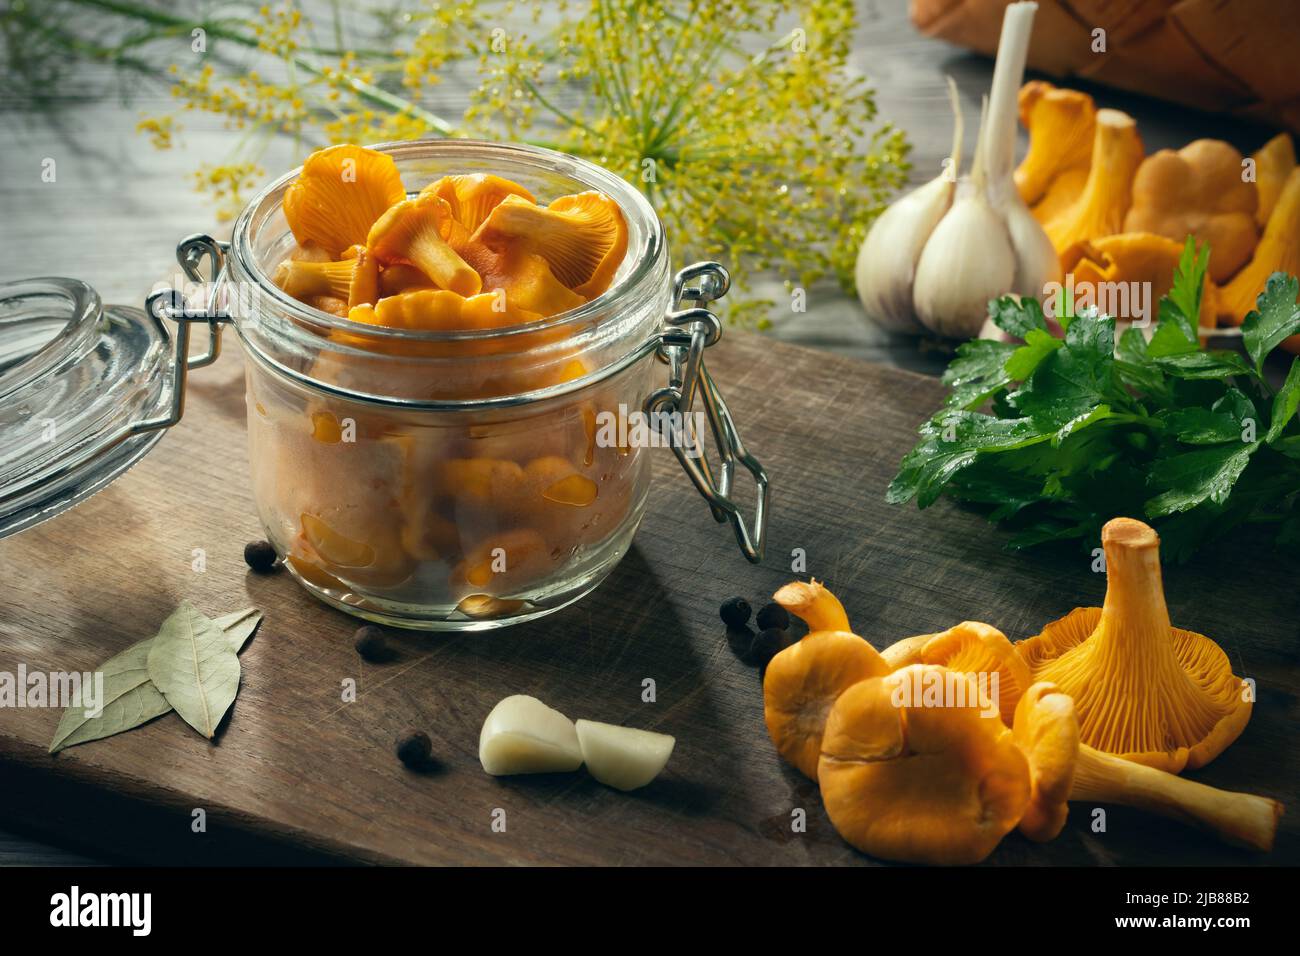 Preserving chanterelle mushrooms in a jar with spices and herbs. Pickling wild edible mushrooms Stock Photo